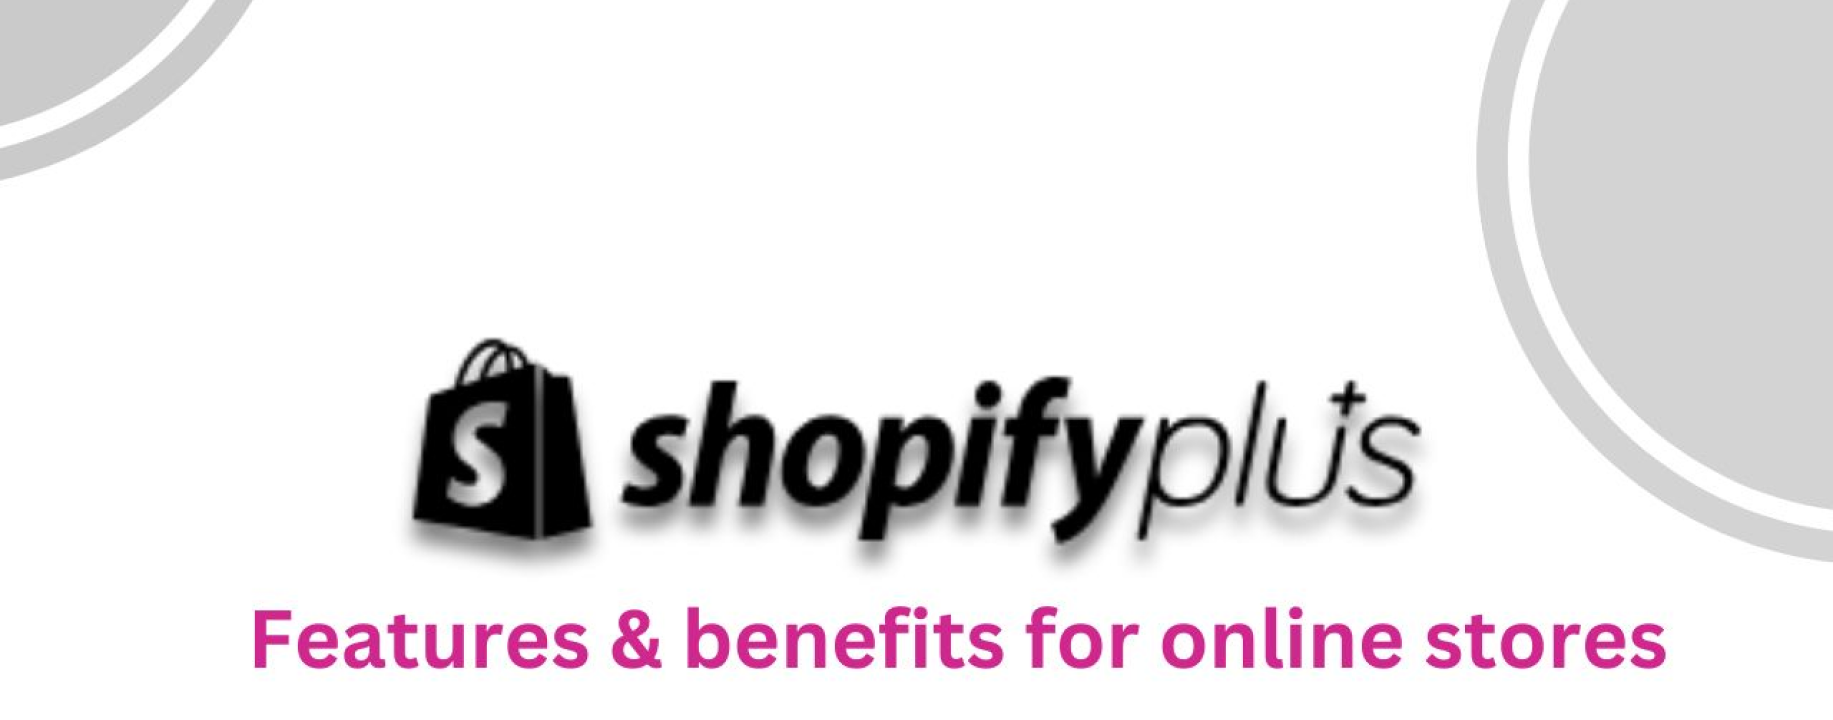 What is Shopify Plus | Features & benefits for online stores?